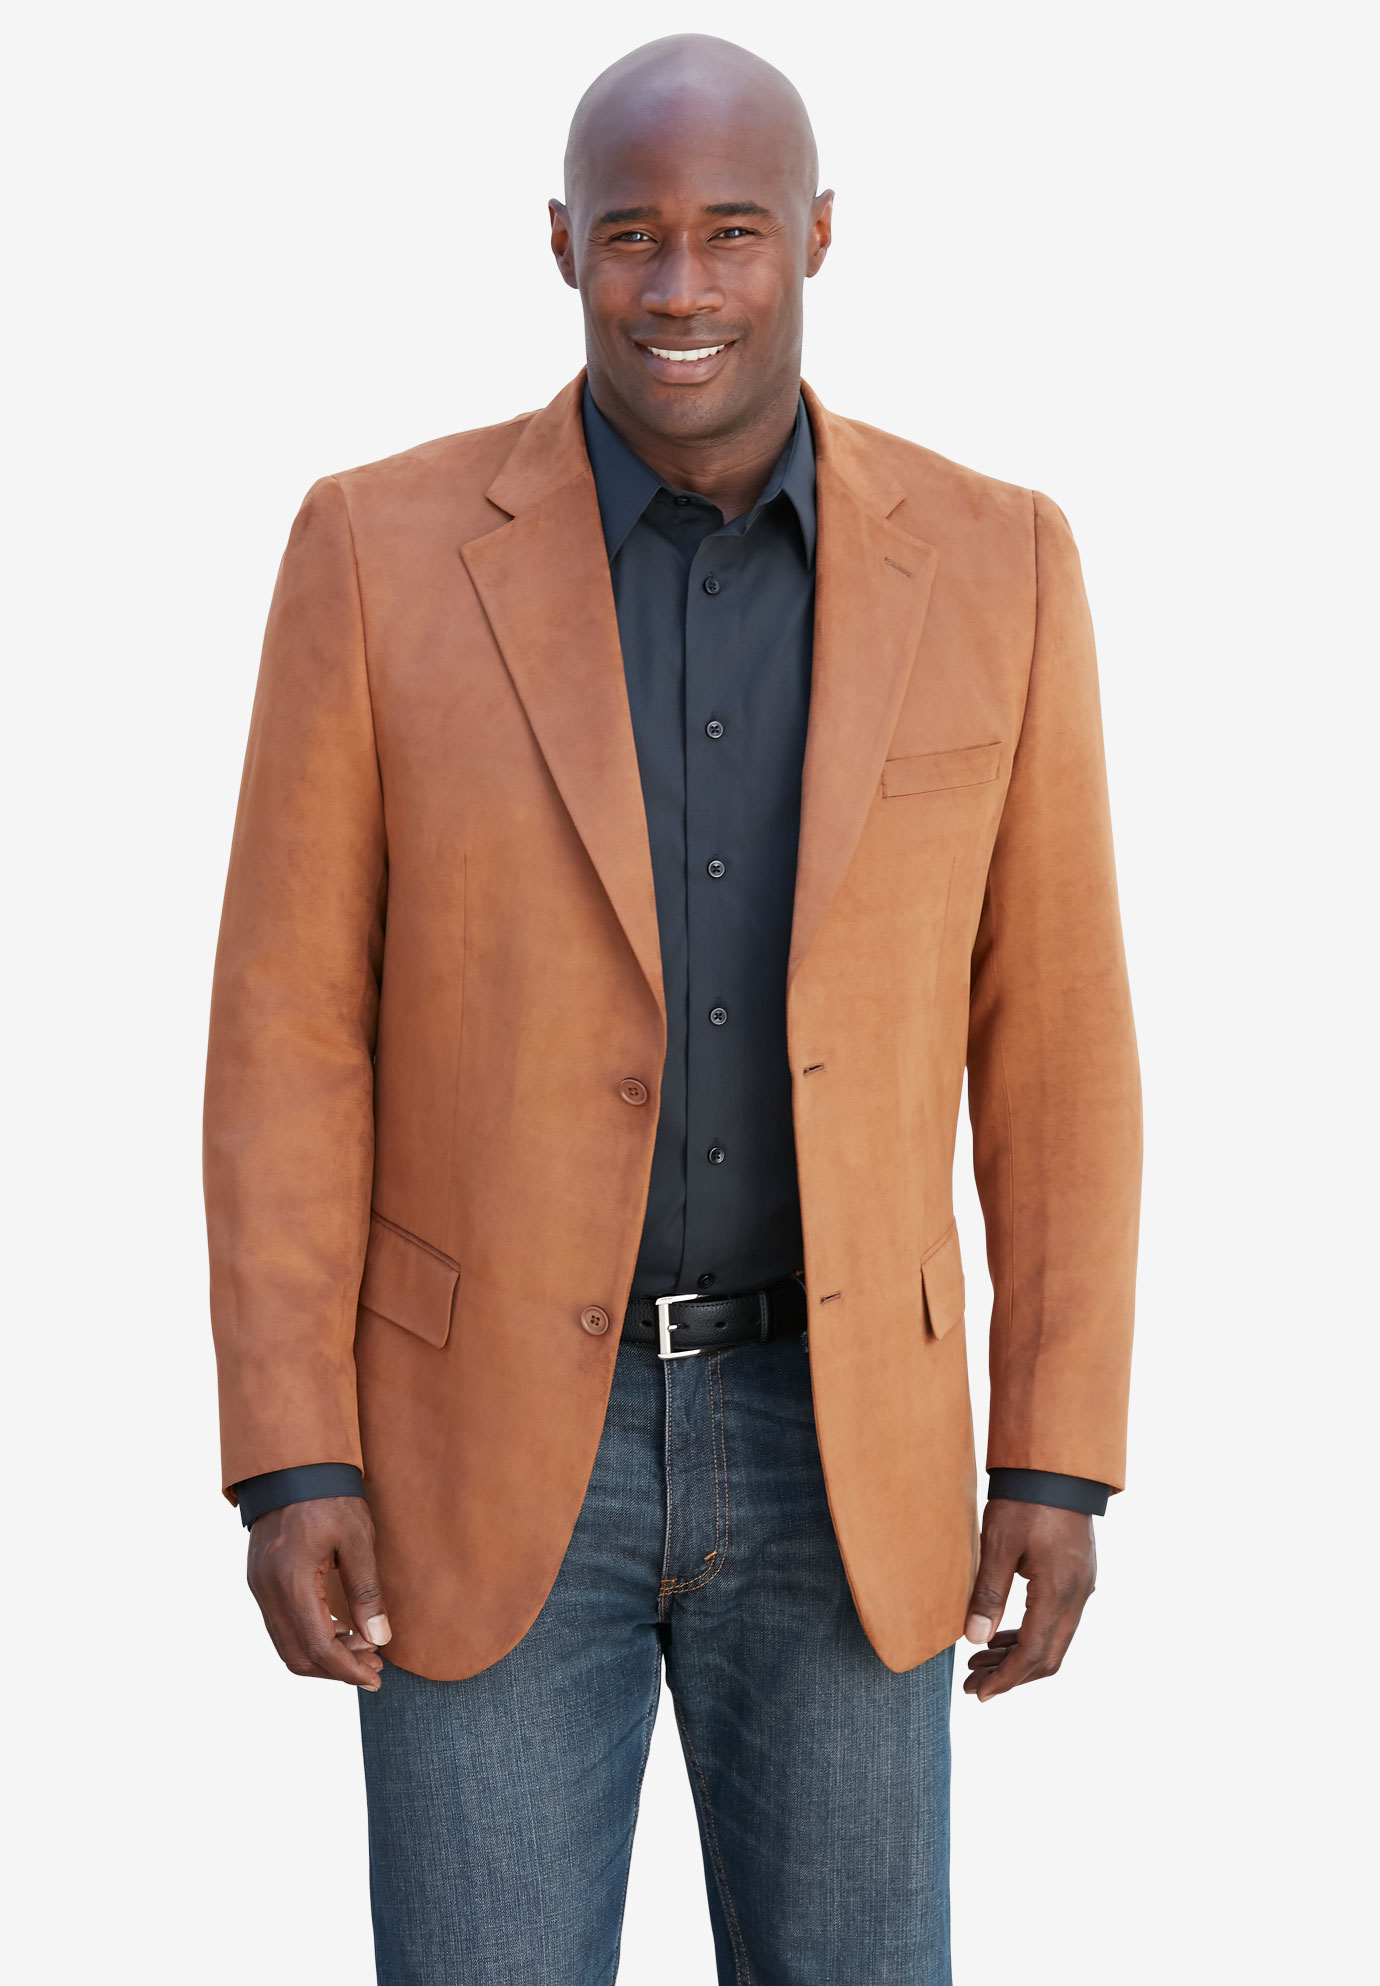 KS Signature Microsuede Sport Coat| Big and Tall Suiting | King Size